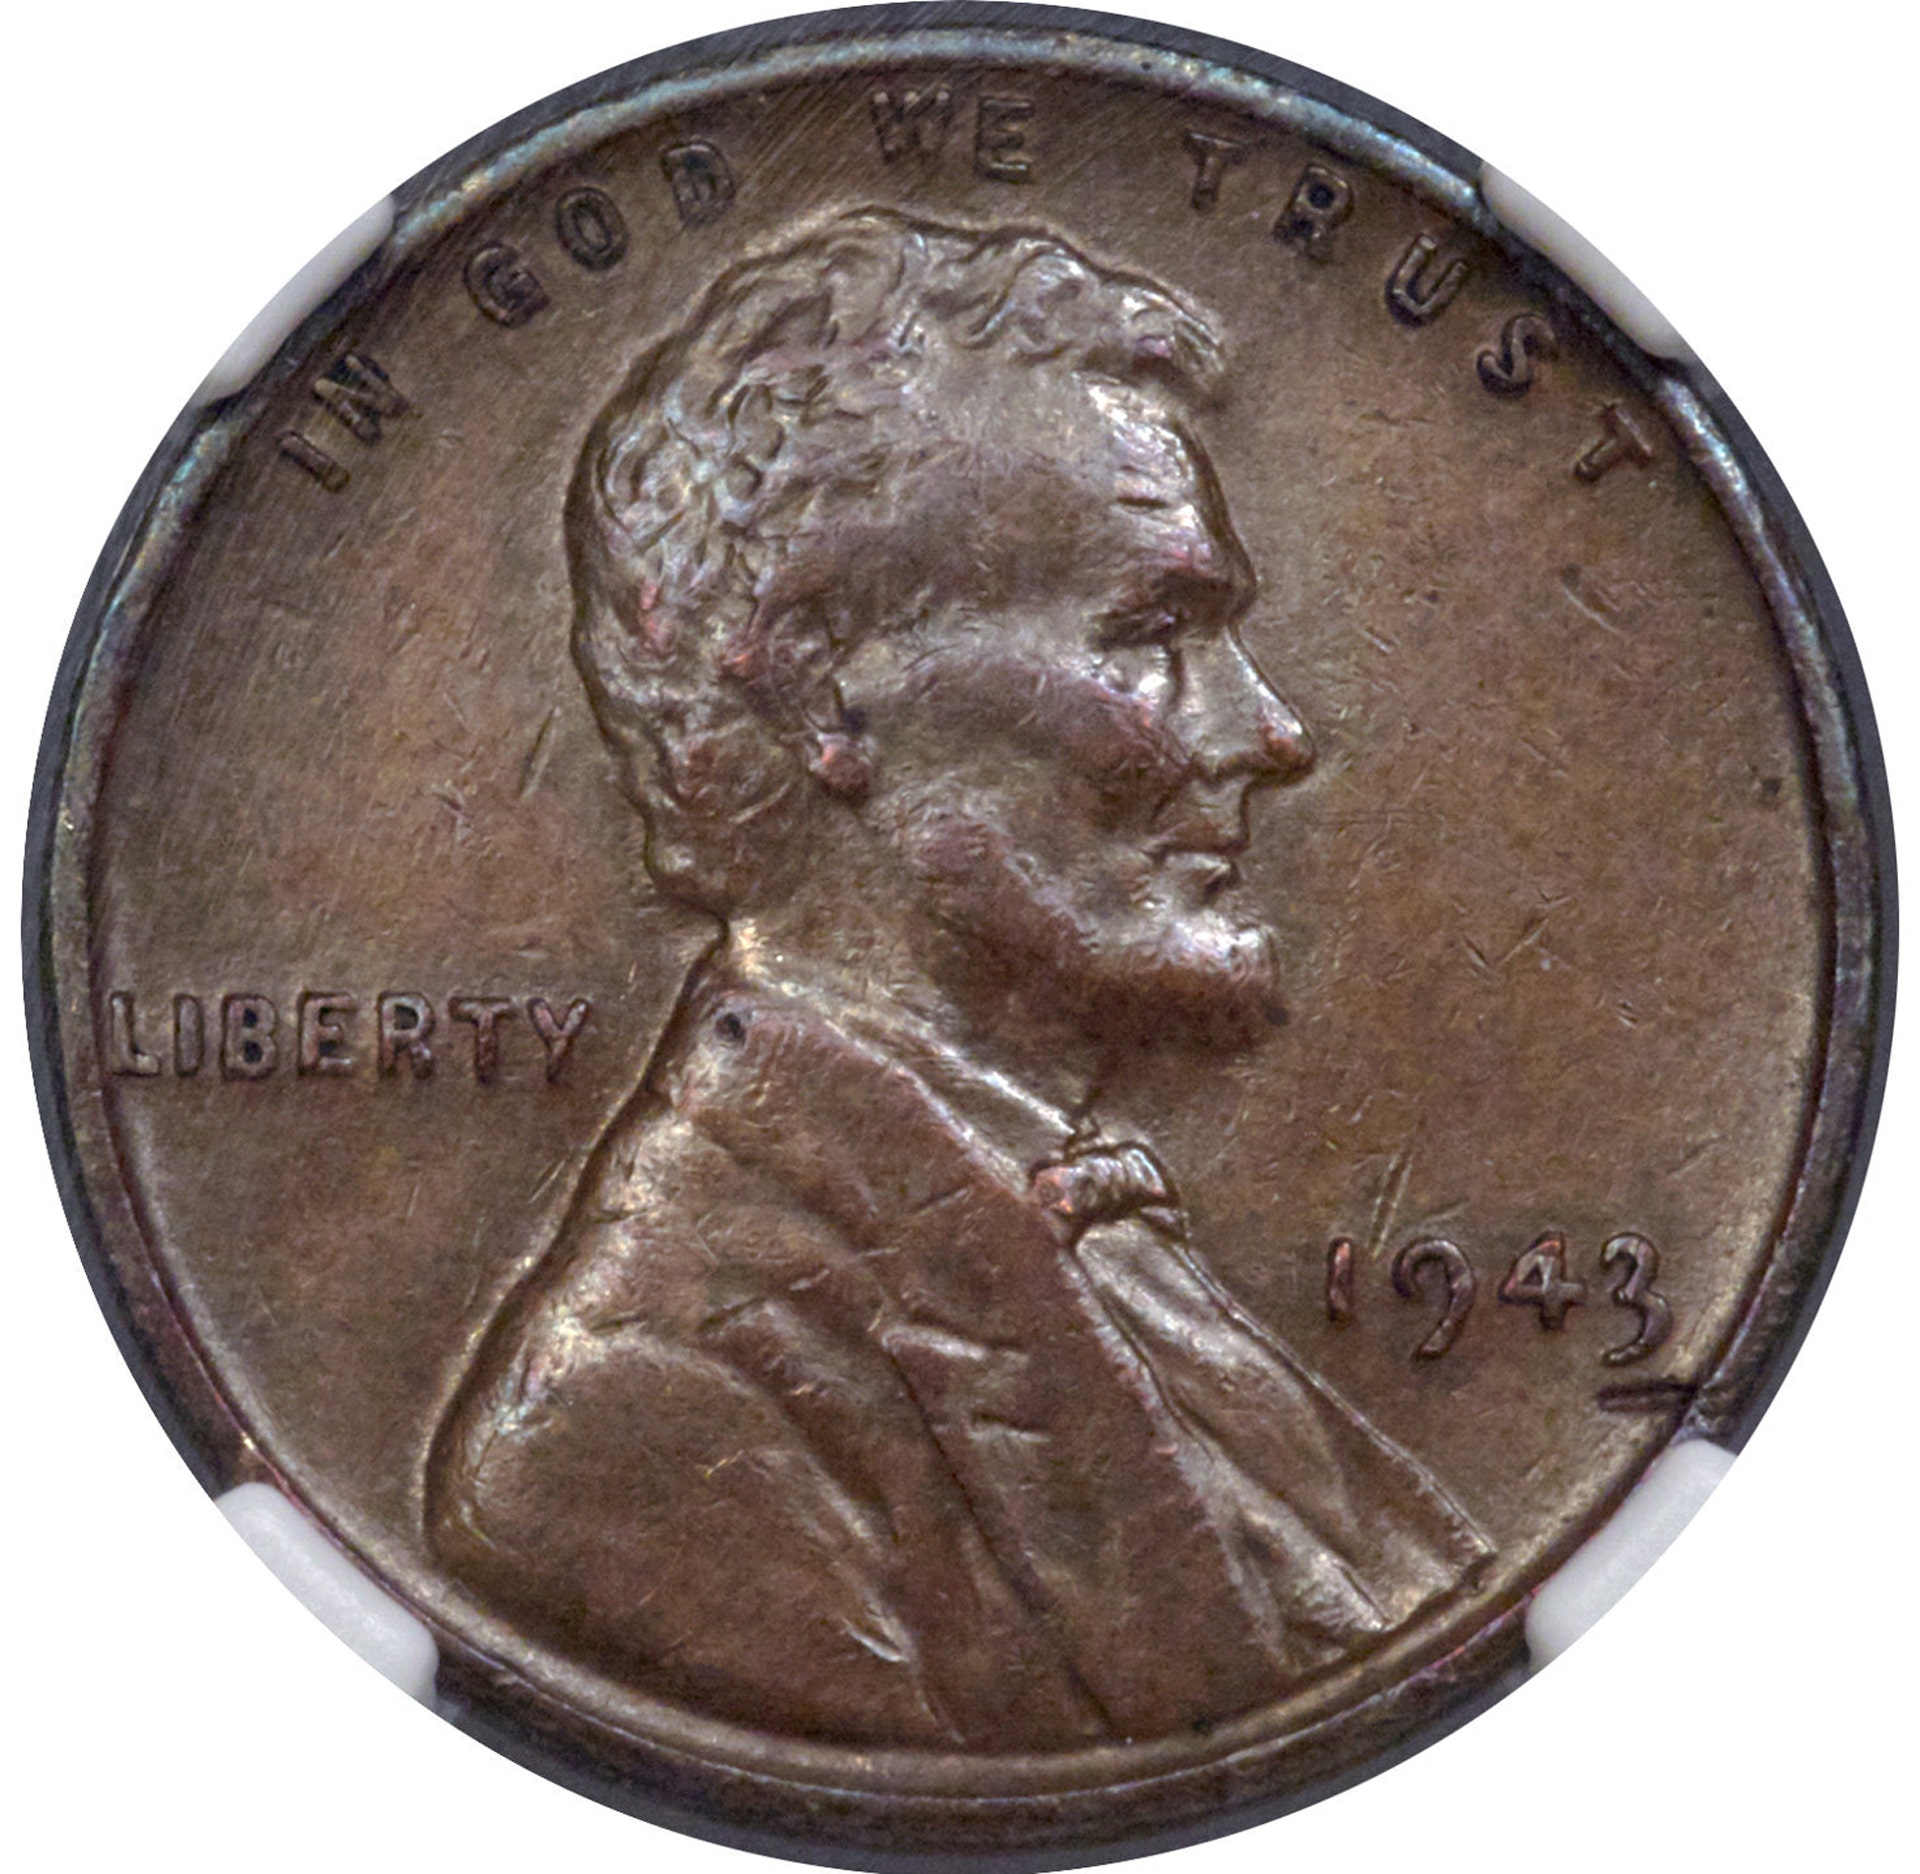 holy-grail-found-rare-penny-might-be-worth-1-7m-after-it-was-found-in-boy-s-lunch-money